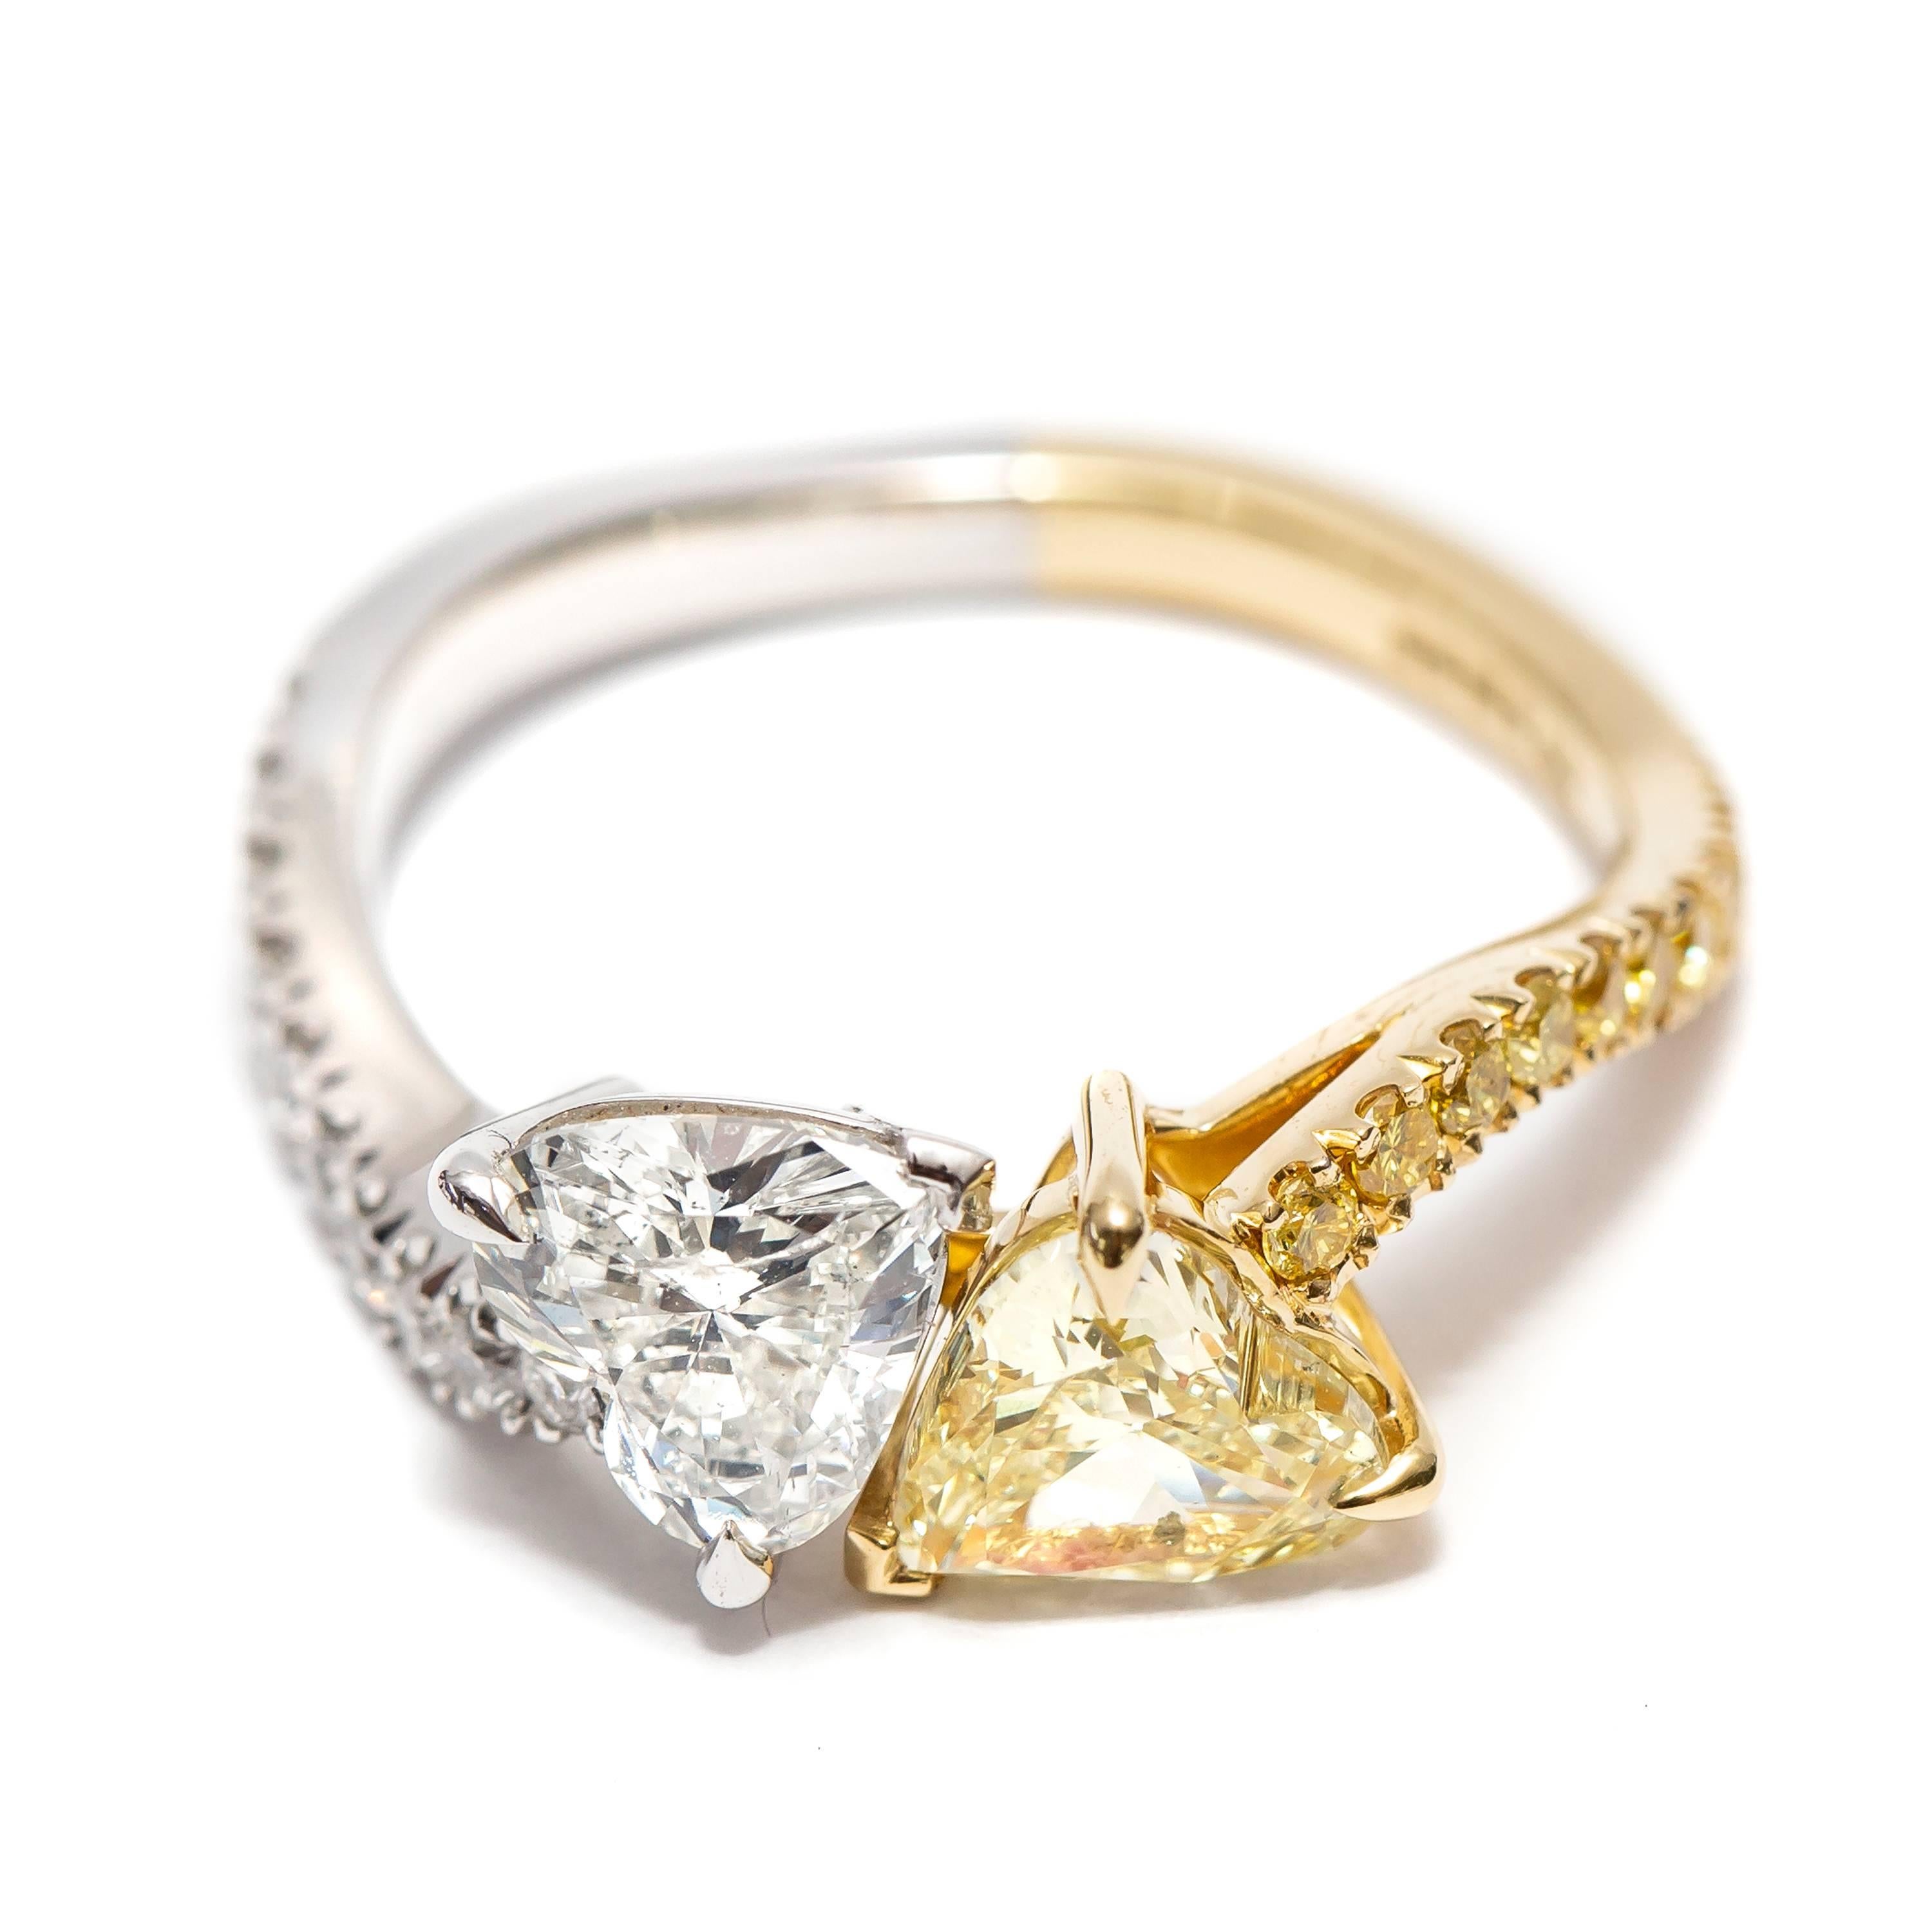 This Stunning 1.70 Carat total double Heart Shape White and Yellow Diamond Engagement Ring Clarity SI2 features 0.16 Carat of White Round Brilliant Diamonds in Platinum and 0.15 Carat of Fancy Intense Yellow Diamonds set in 18 Karat Yellow Gold,